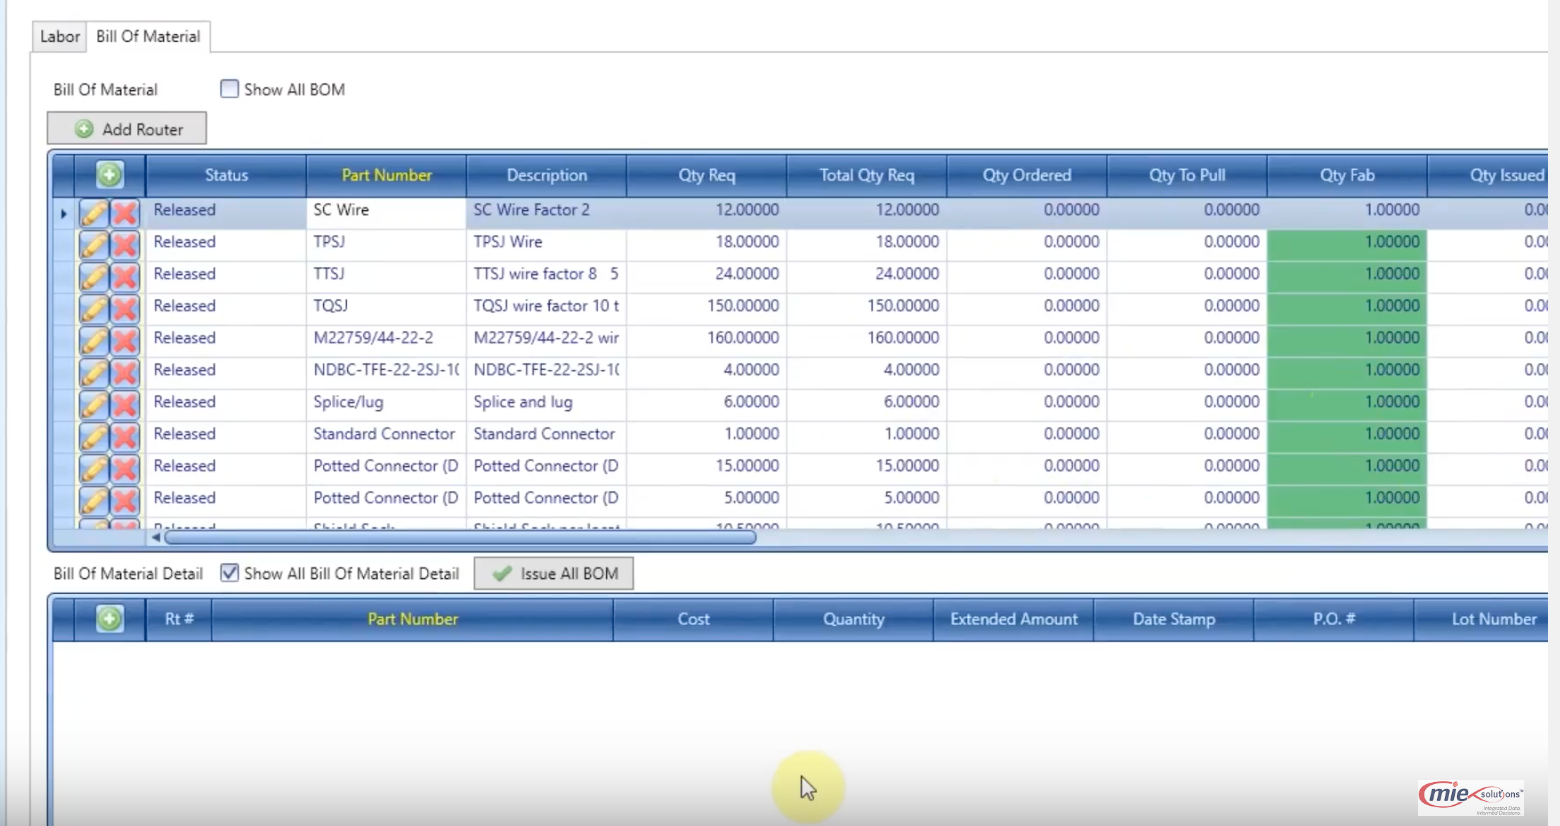 MIE Trak Pro Software - Review all bill of material details